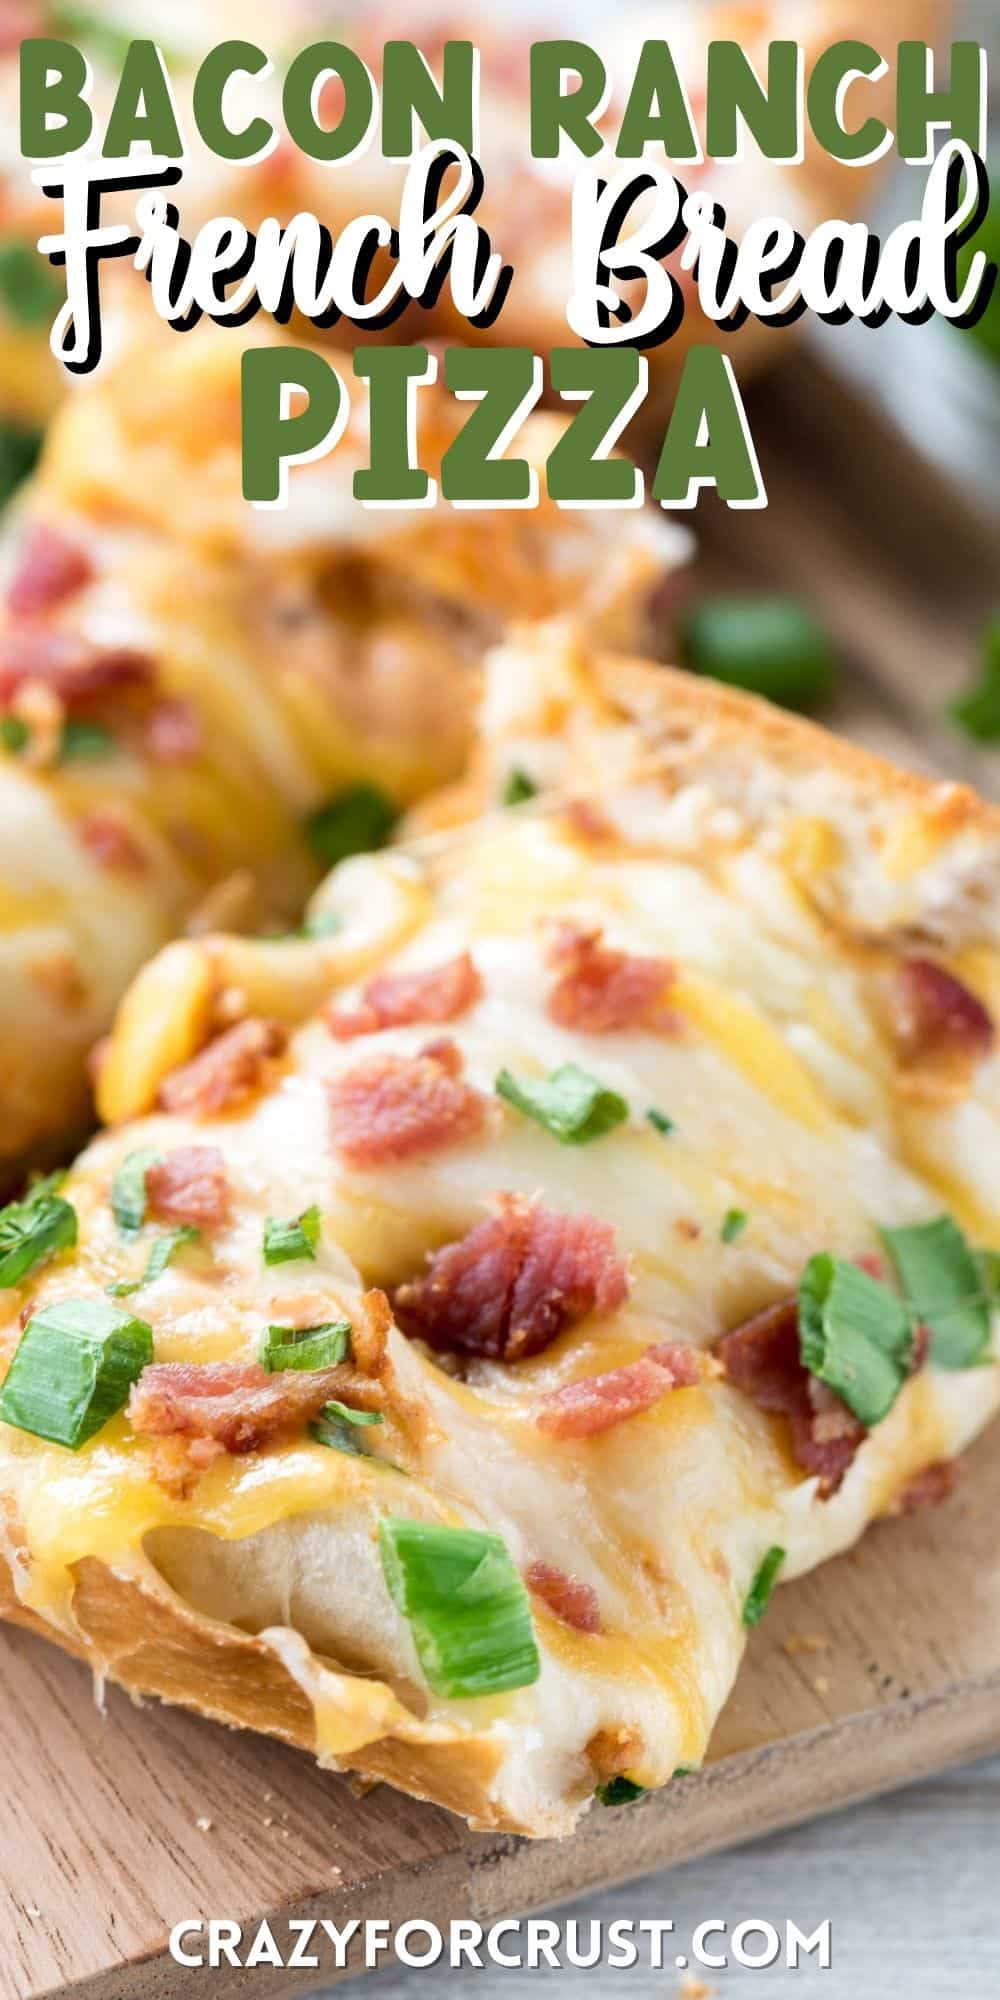 pizza with cheese and bacon on top and words on the image